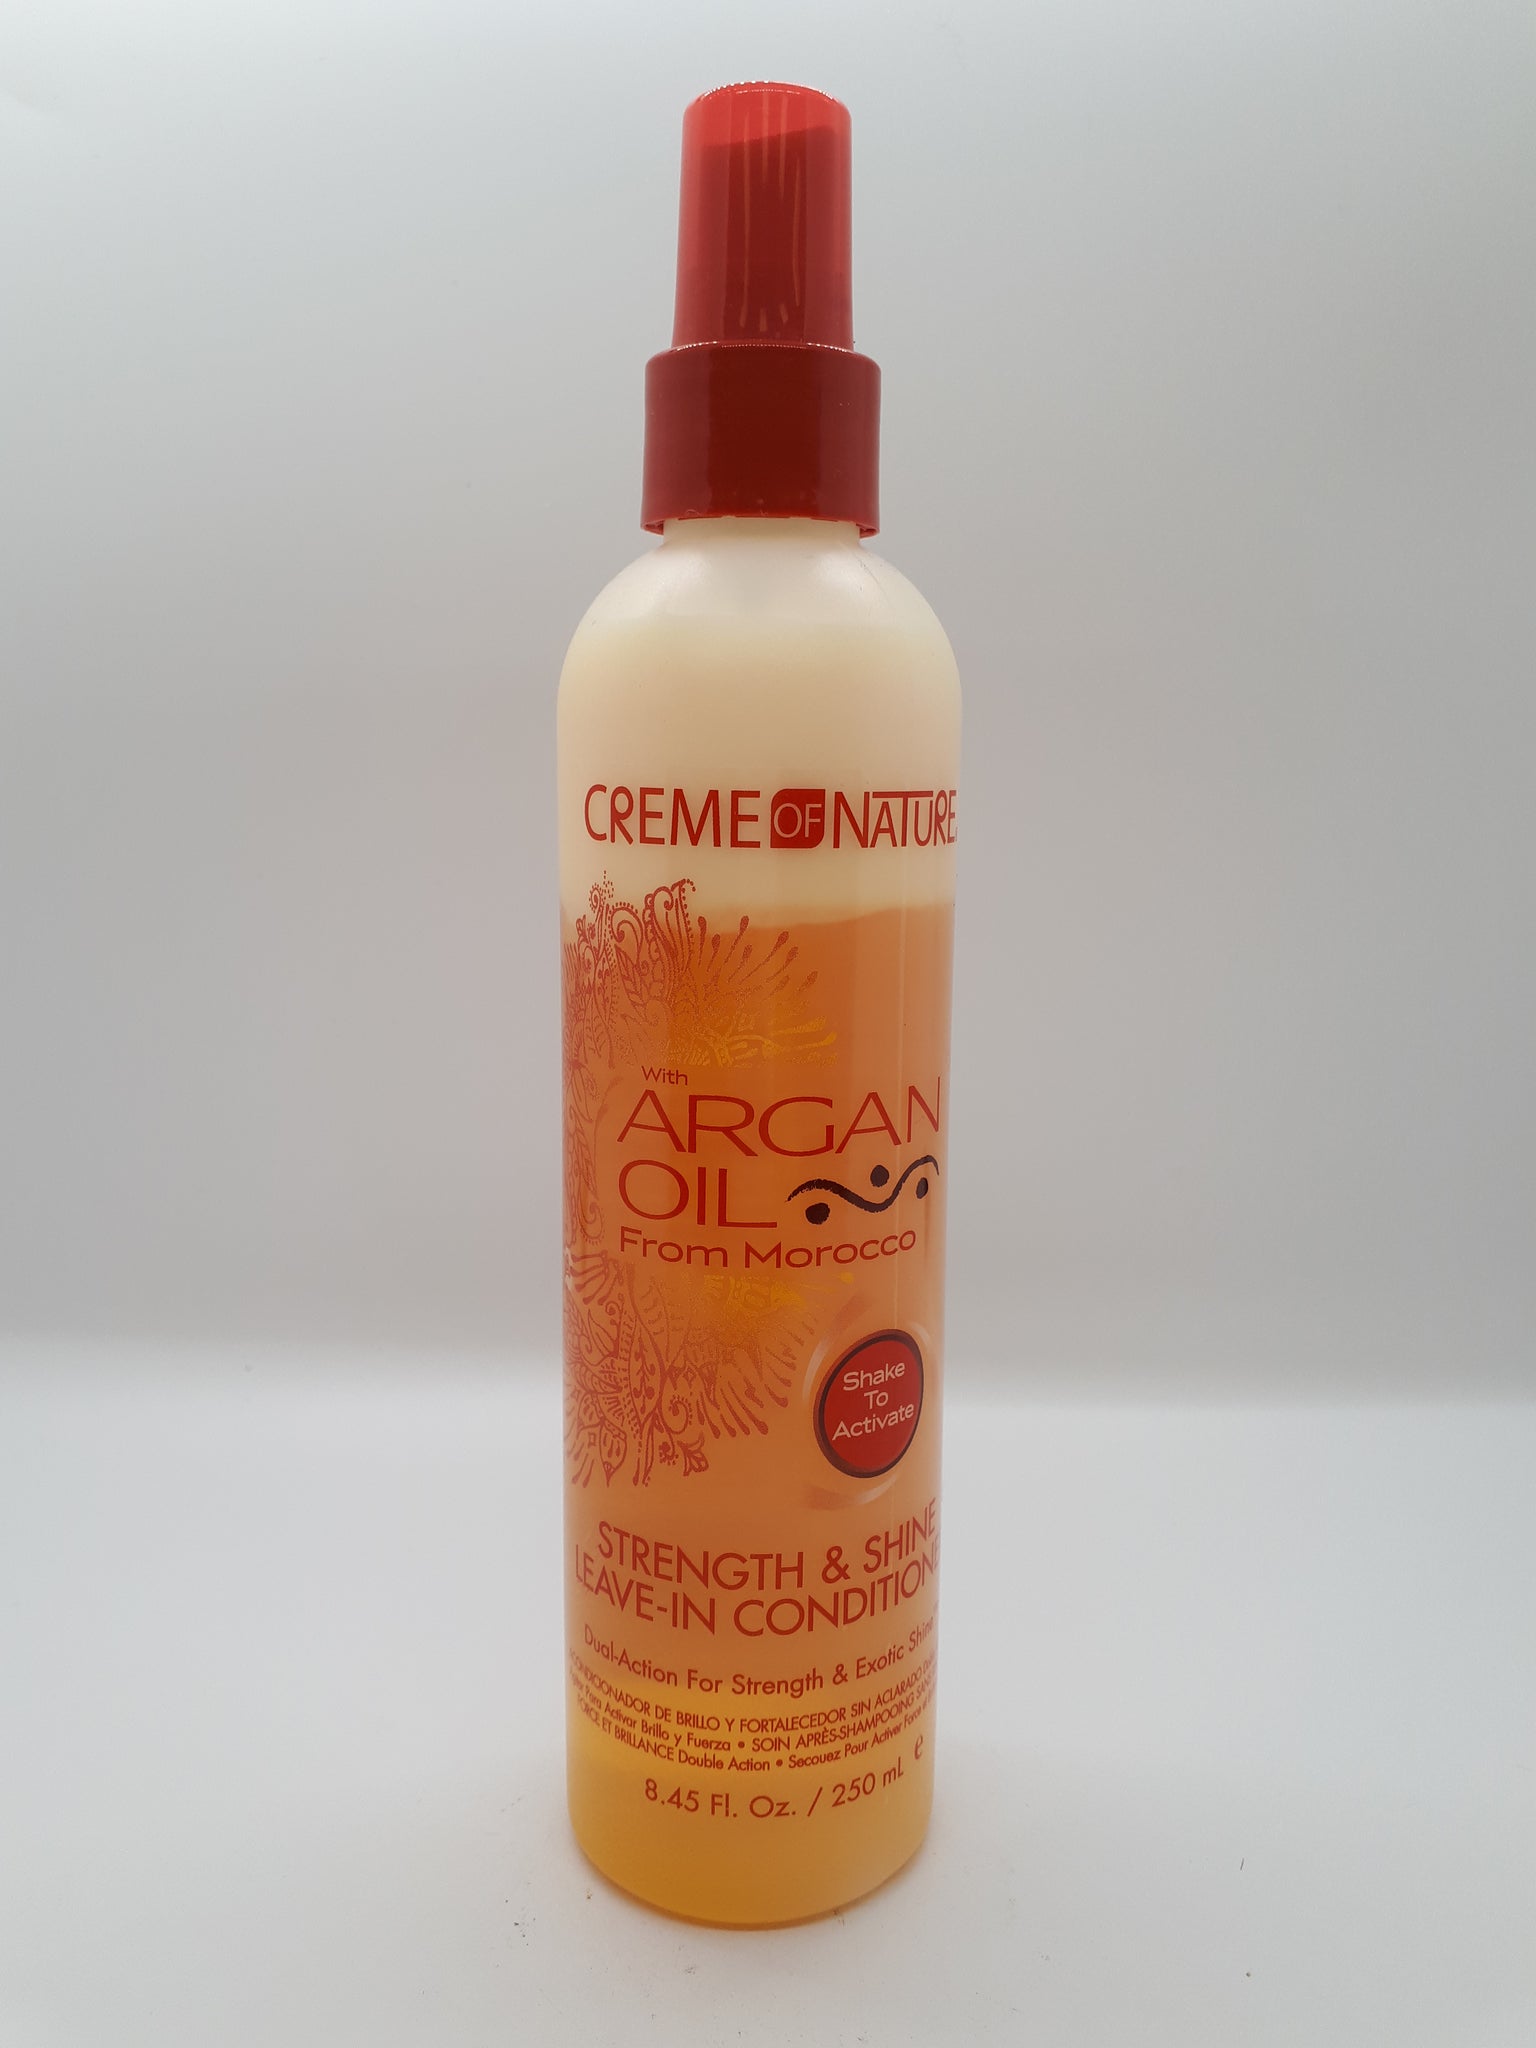 CREME OF NATURE - Argan Oil Strength & Shine Leave-in Conditioner